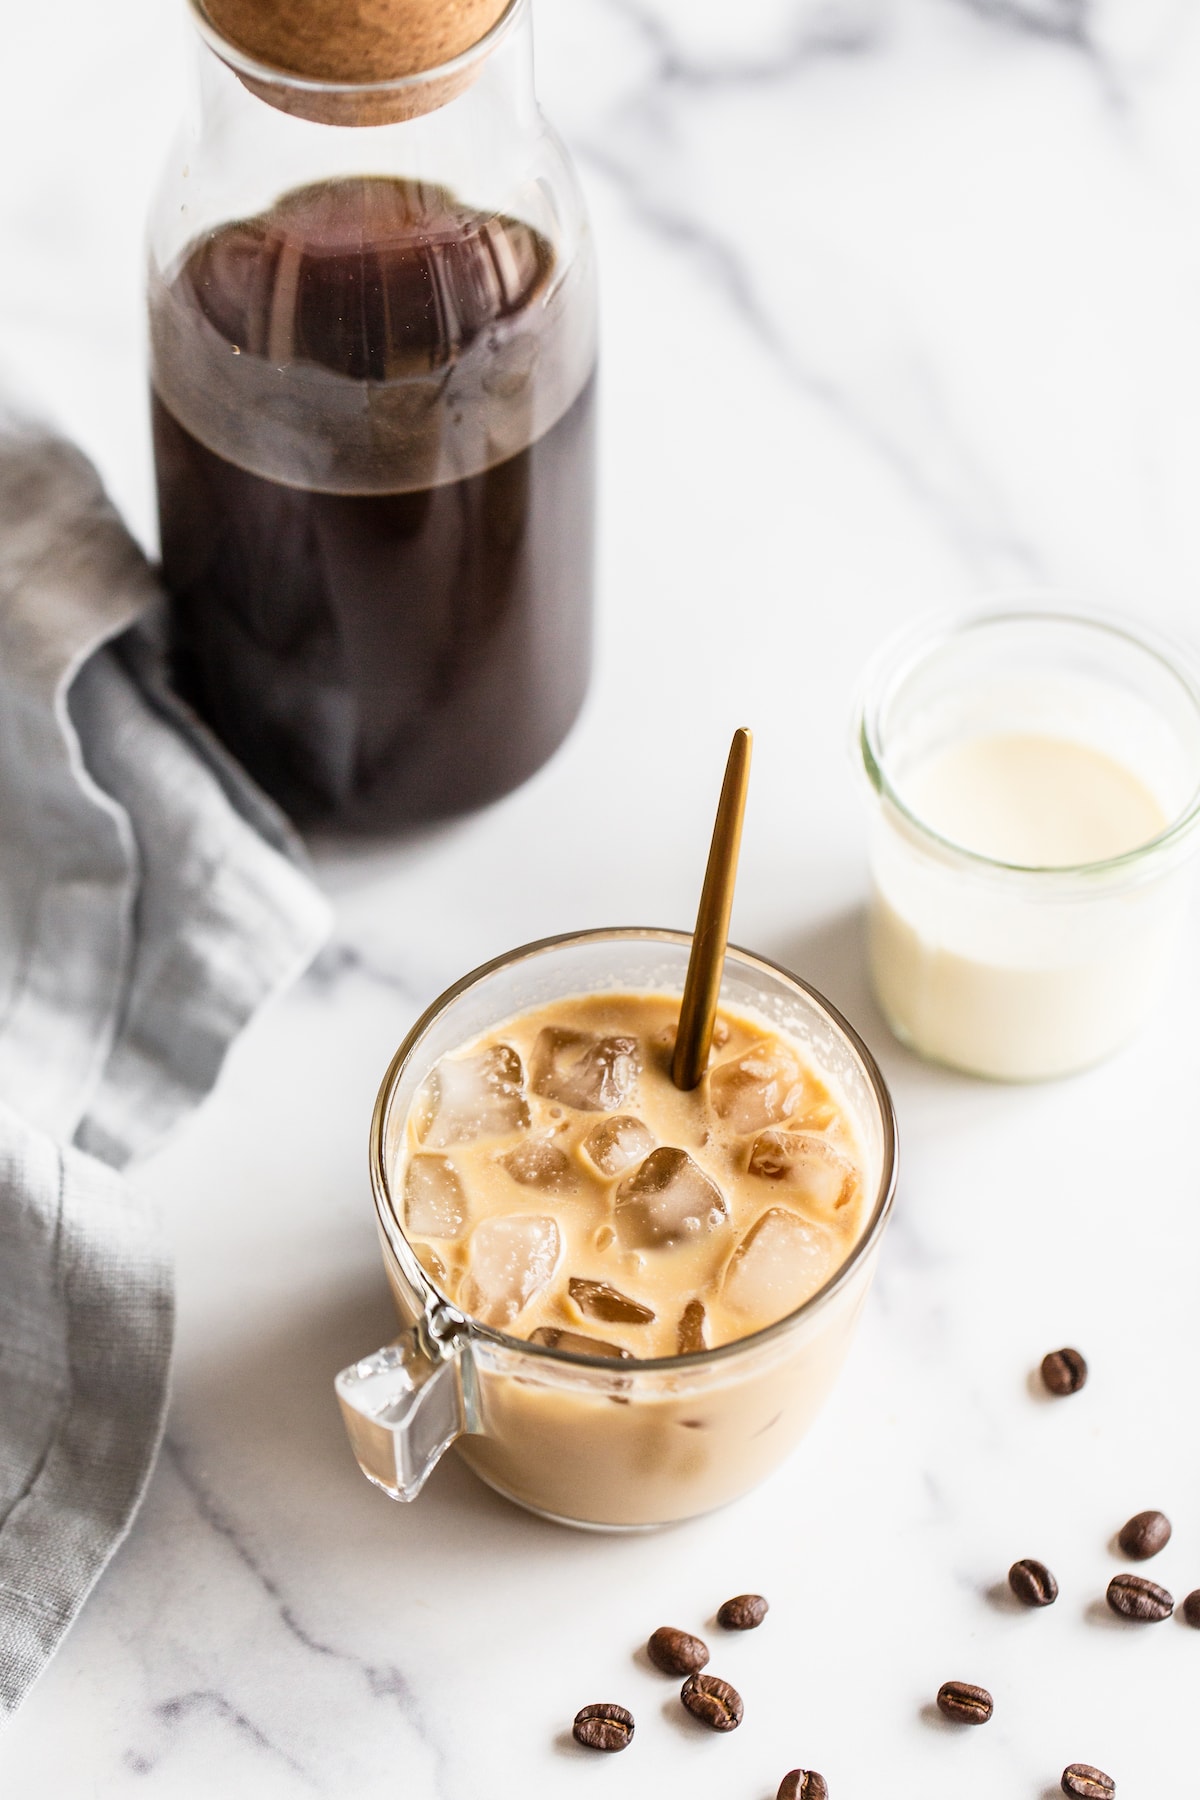 Glass jar with cold brew, cream, ice cubes and a spoon to mix. Beside the jar is a jar of cold brew and a jar of cream. Coffee beans are on the table.